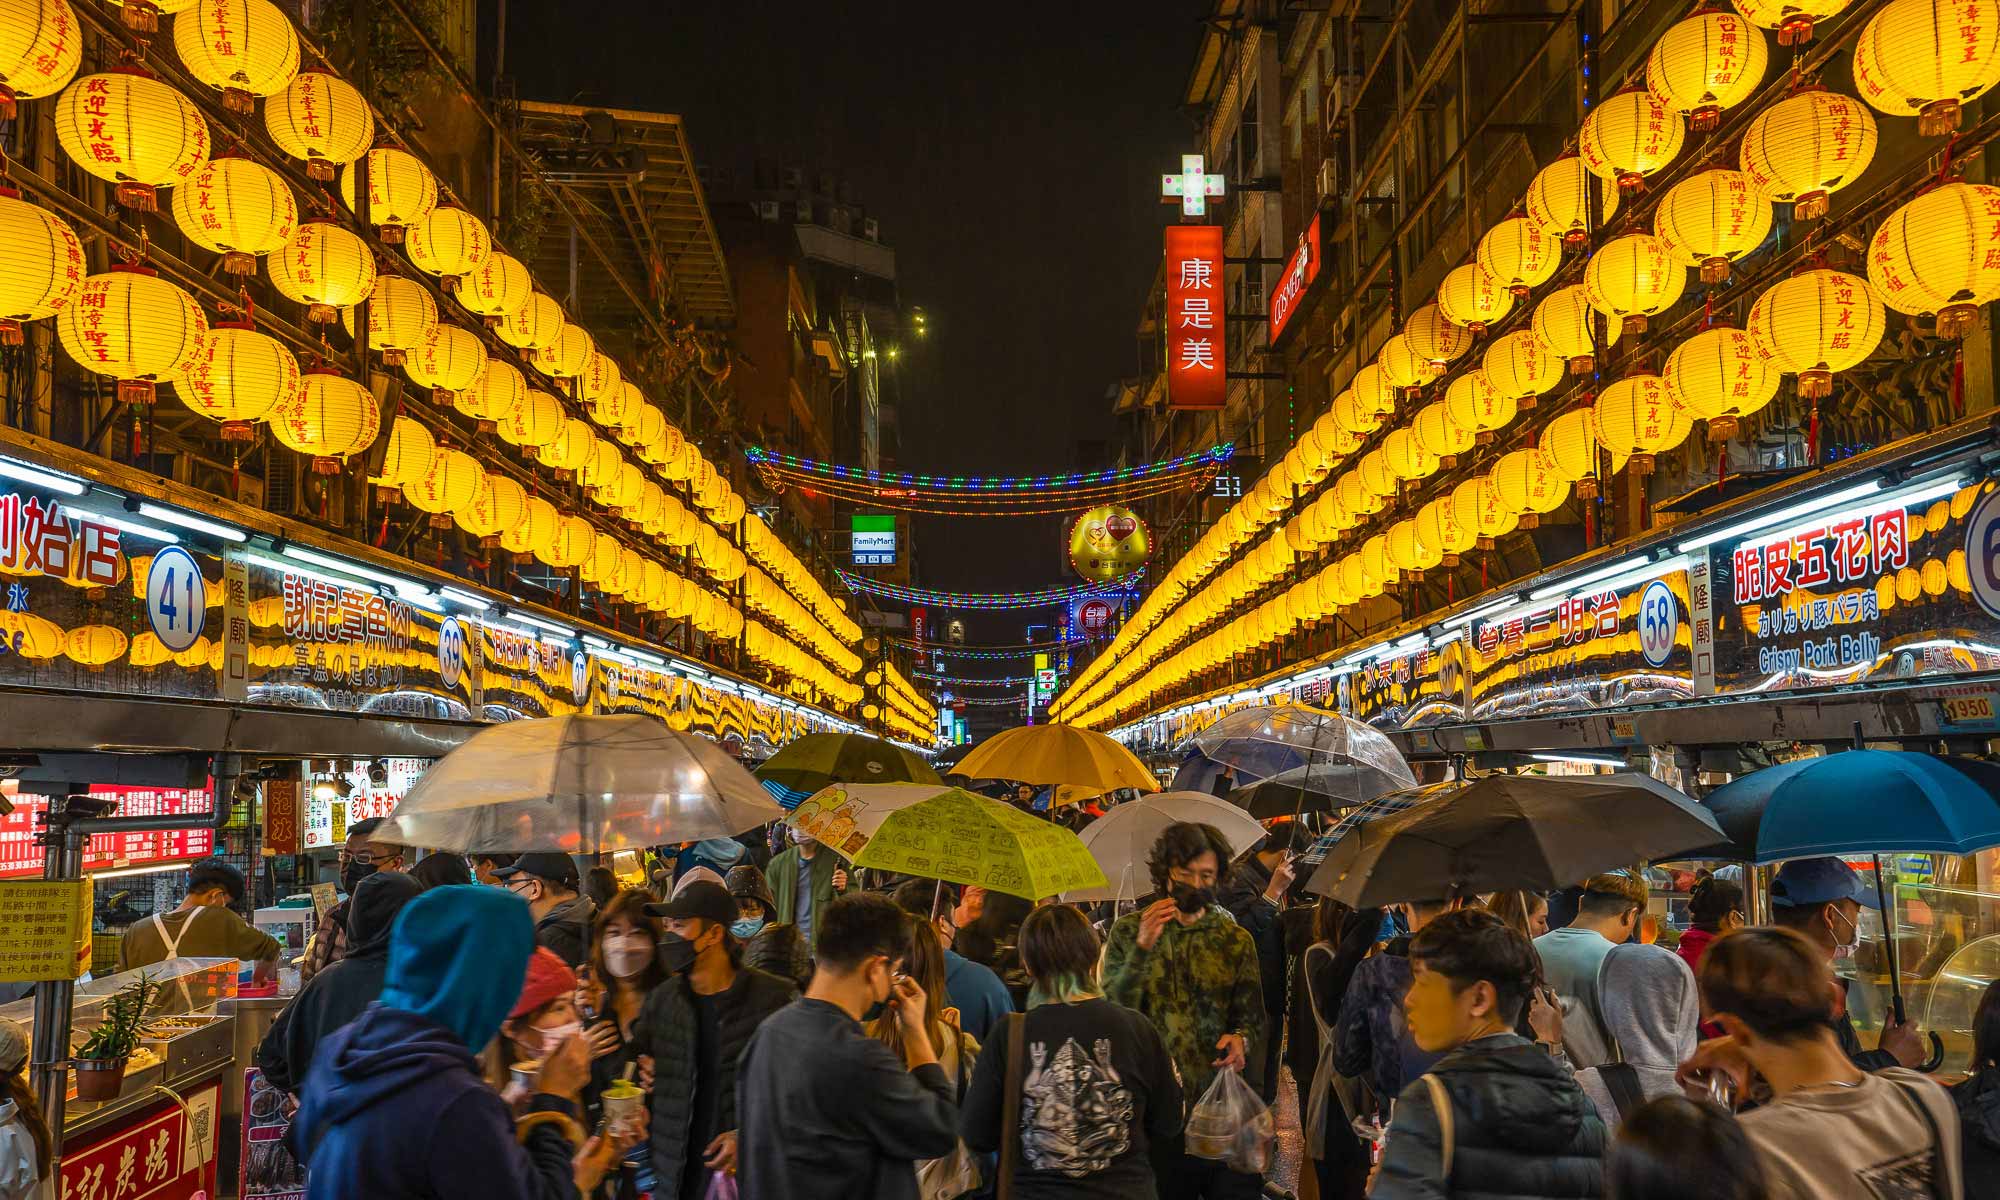 Crowds of pedestrians walking through Rensan Road at night; the road is lined by three rows of yellow lanterns on either side.